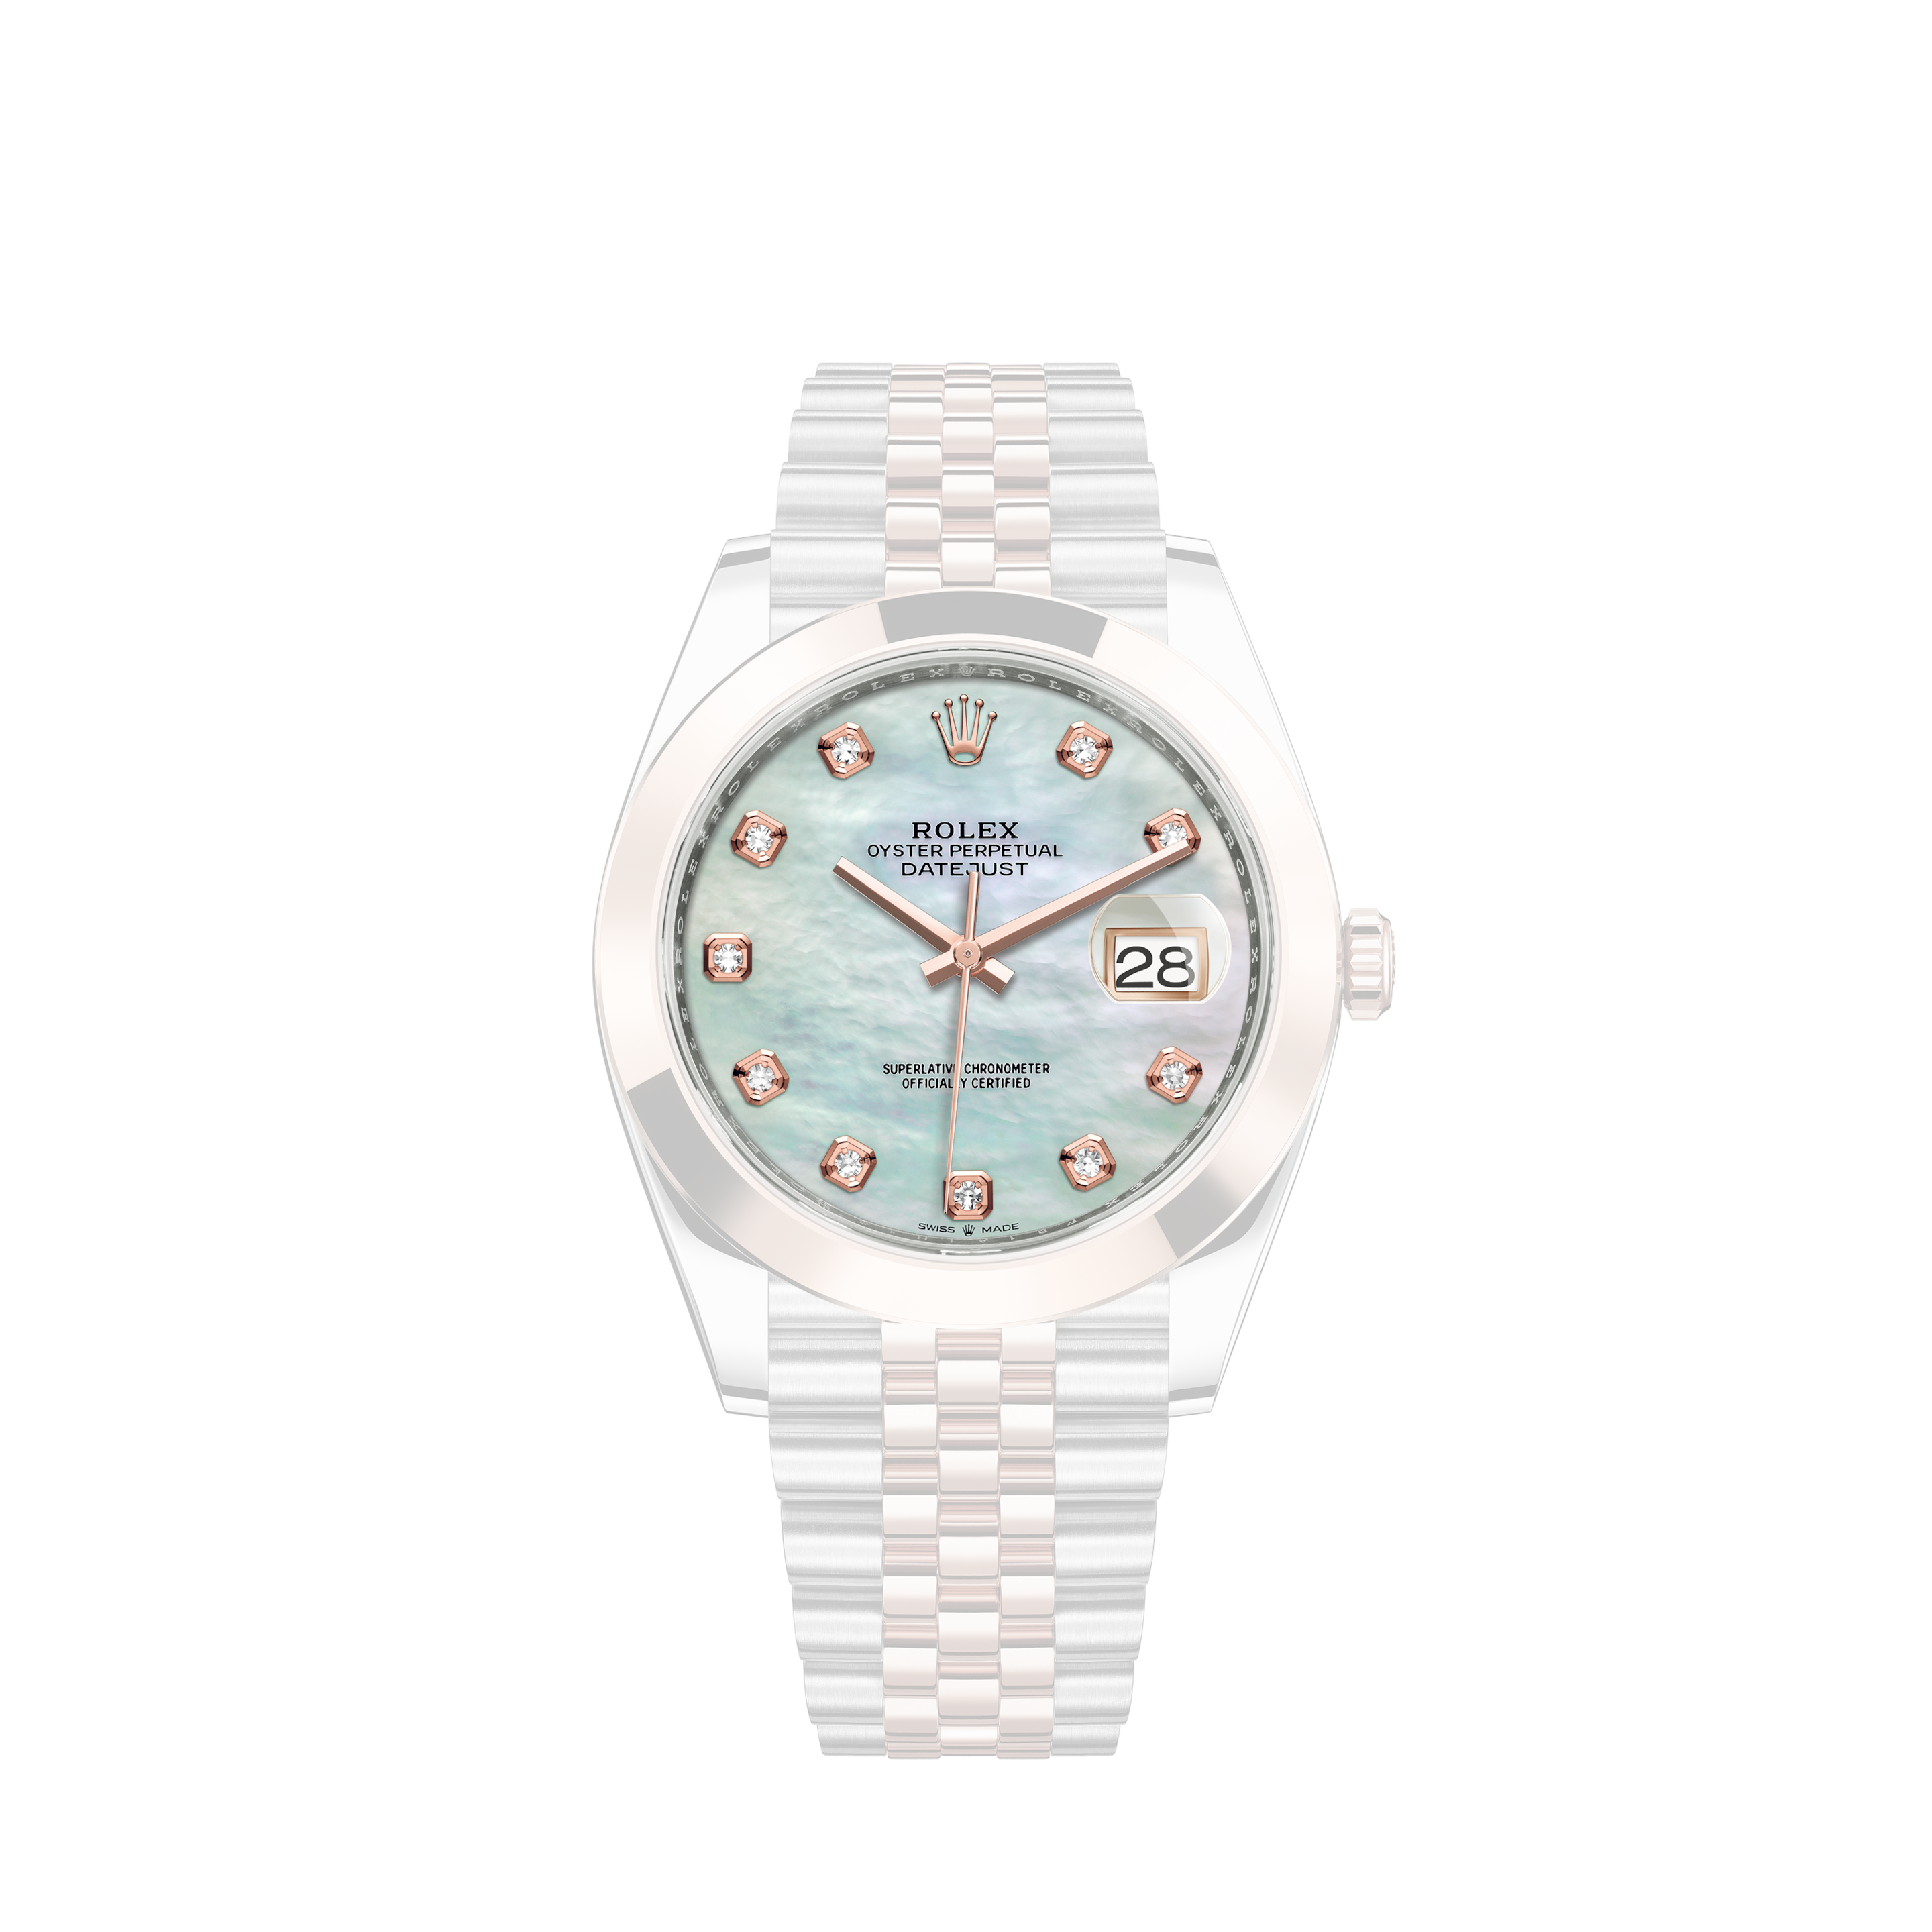 Rolex Datejust 31 31 mm Stainless Steel and Everose Gold 178341-0032 Ladies WatchRolex Datejust 31 31 mm Stainless Steel and Everose Gold 178341-0060 Ladies Watch